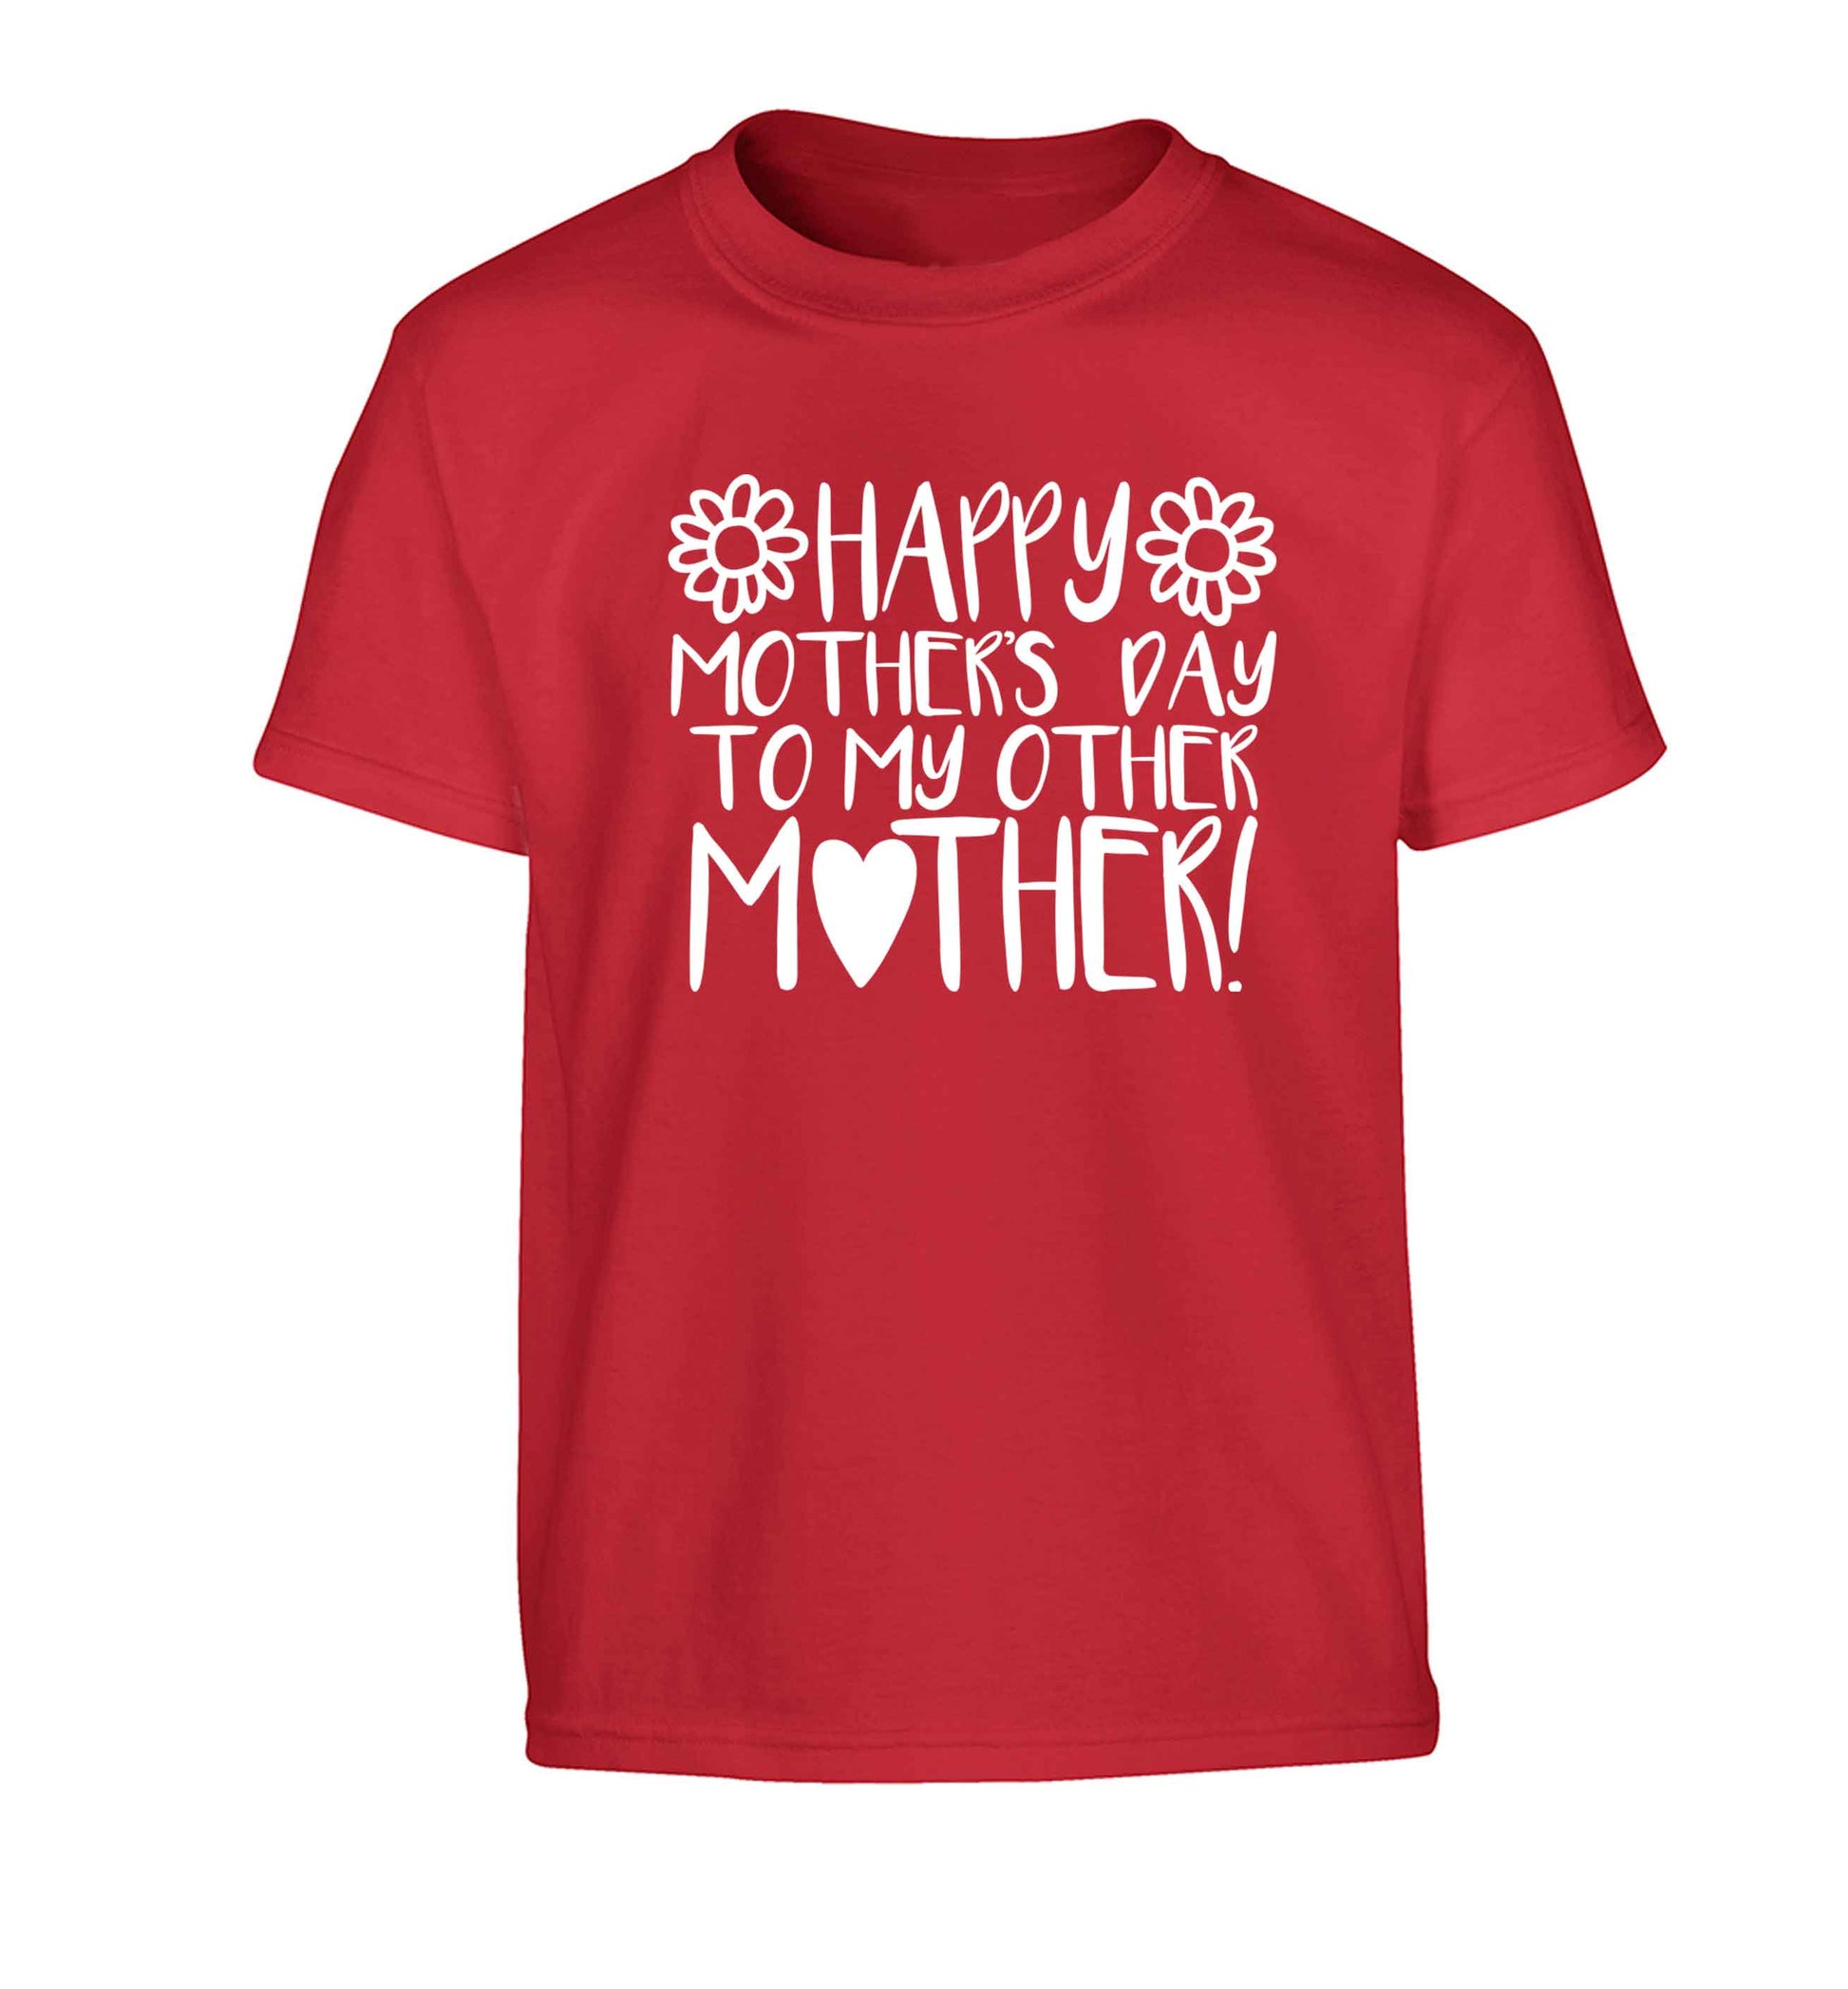 Happy mother's day to my other mother Children's red Tshirt 12-13 Years